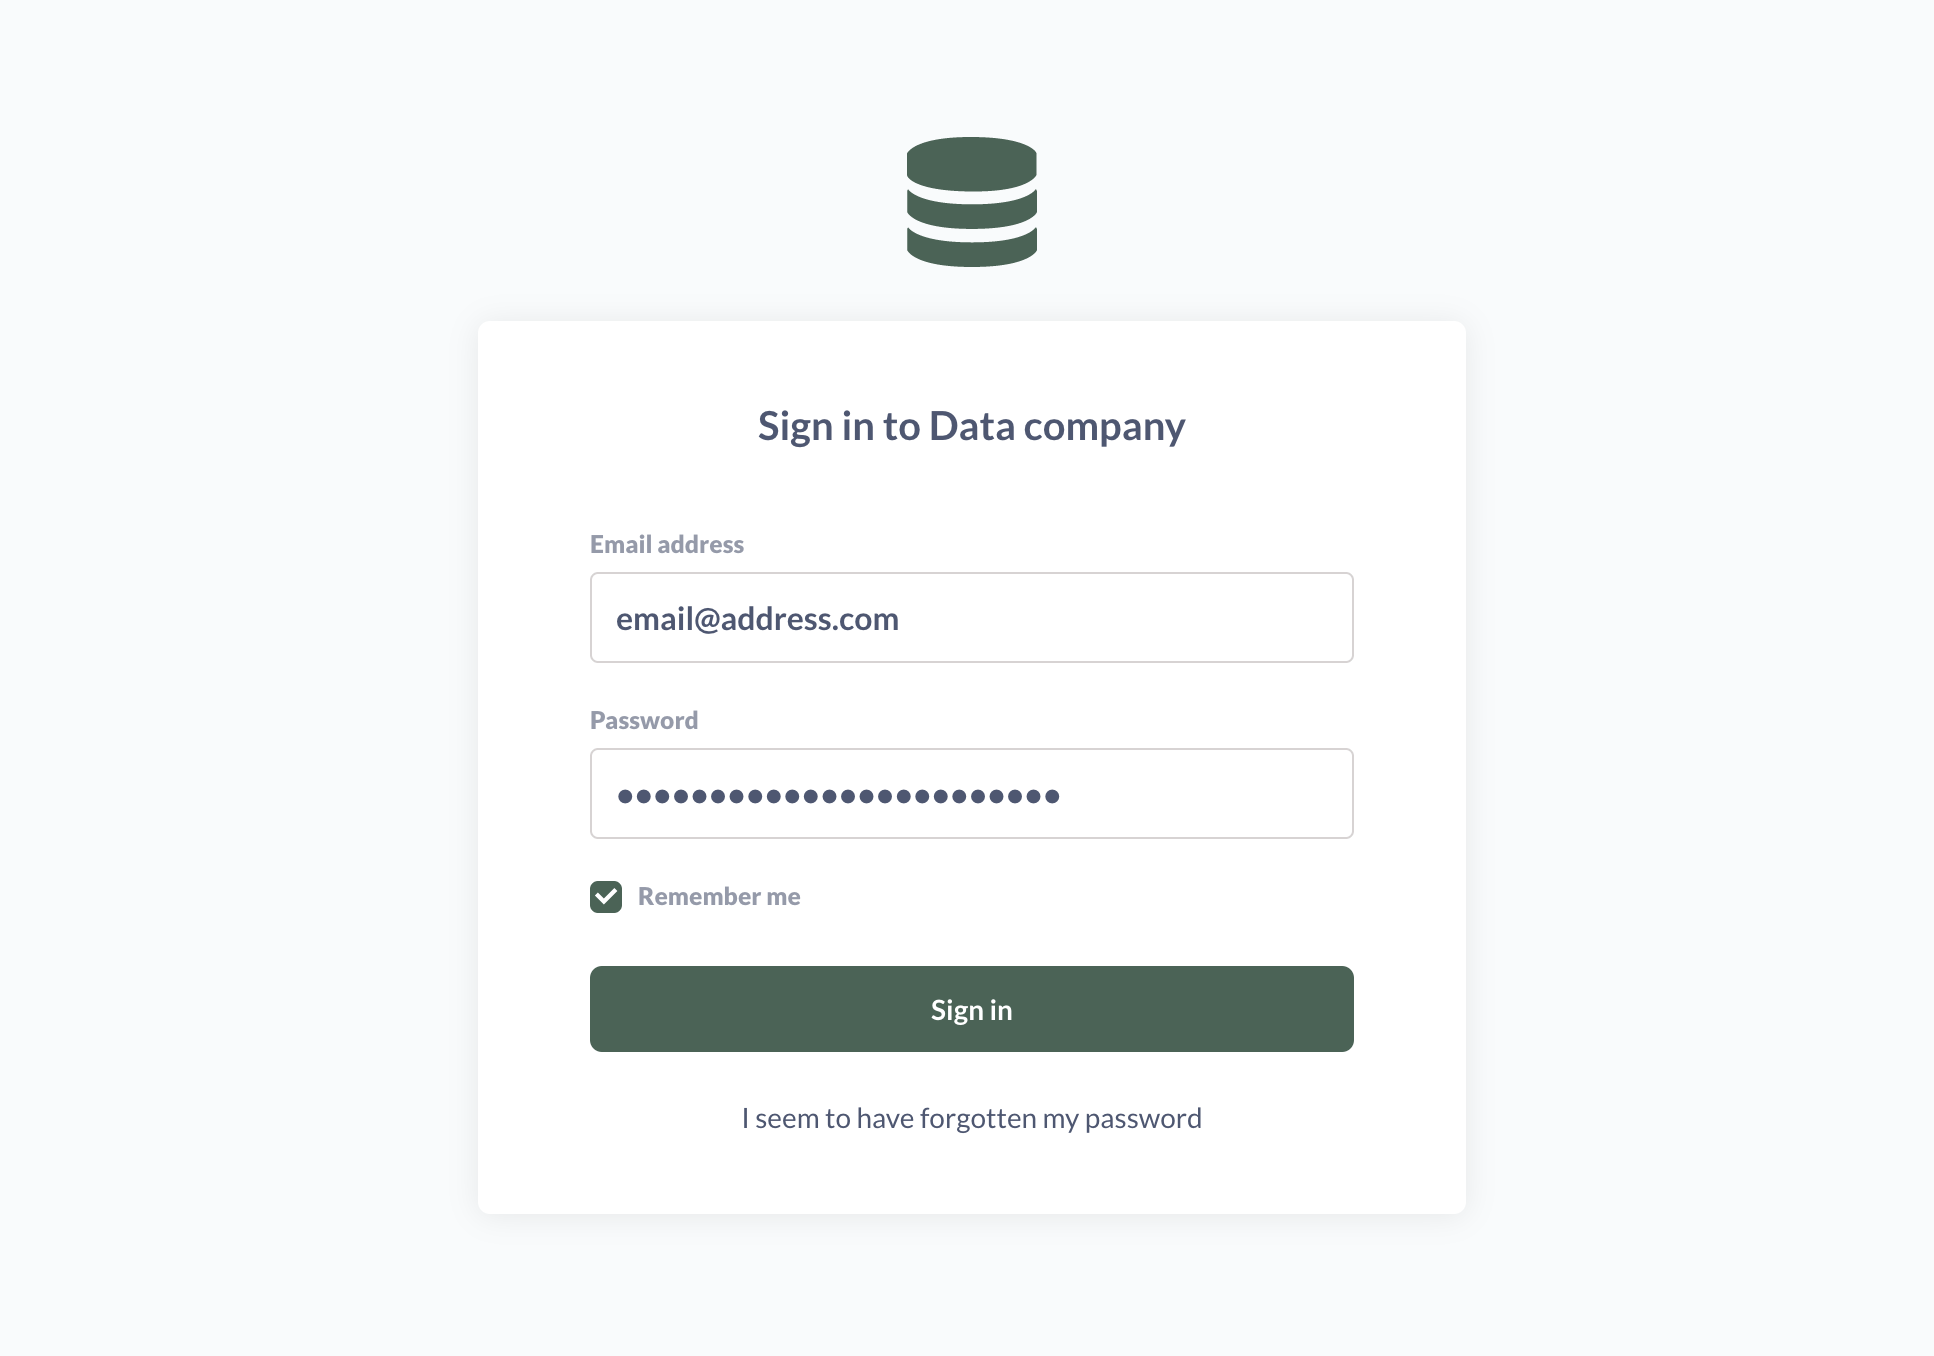 Sign-in page with brand colors and logo applied for the Data company